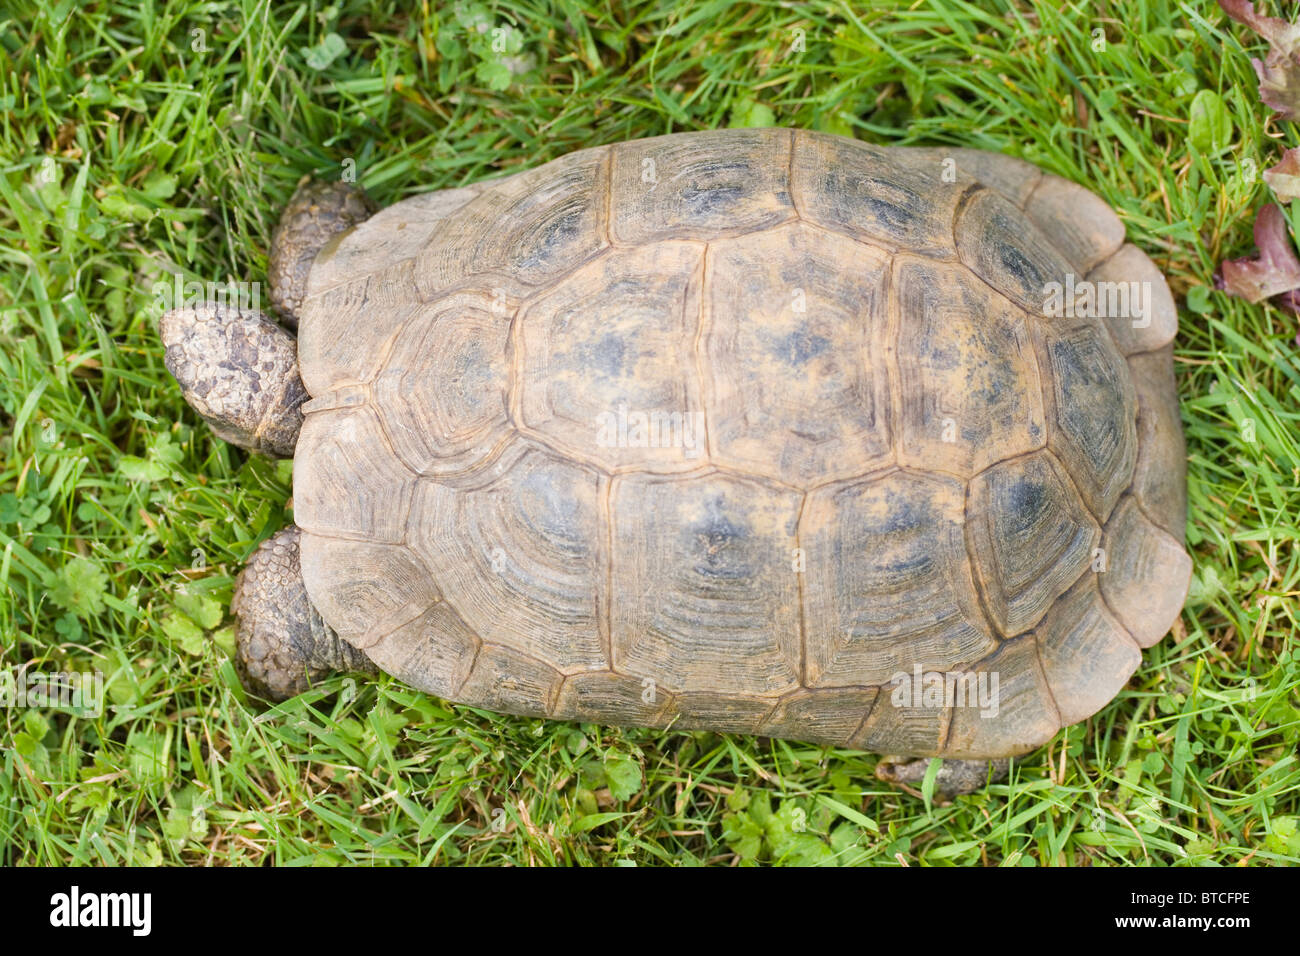 Mediterranean Spur-thighed Tortoise (Testudo graeca). Looking down on shell or carapace; dorsal view. Stock Photo